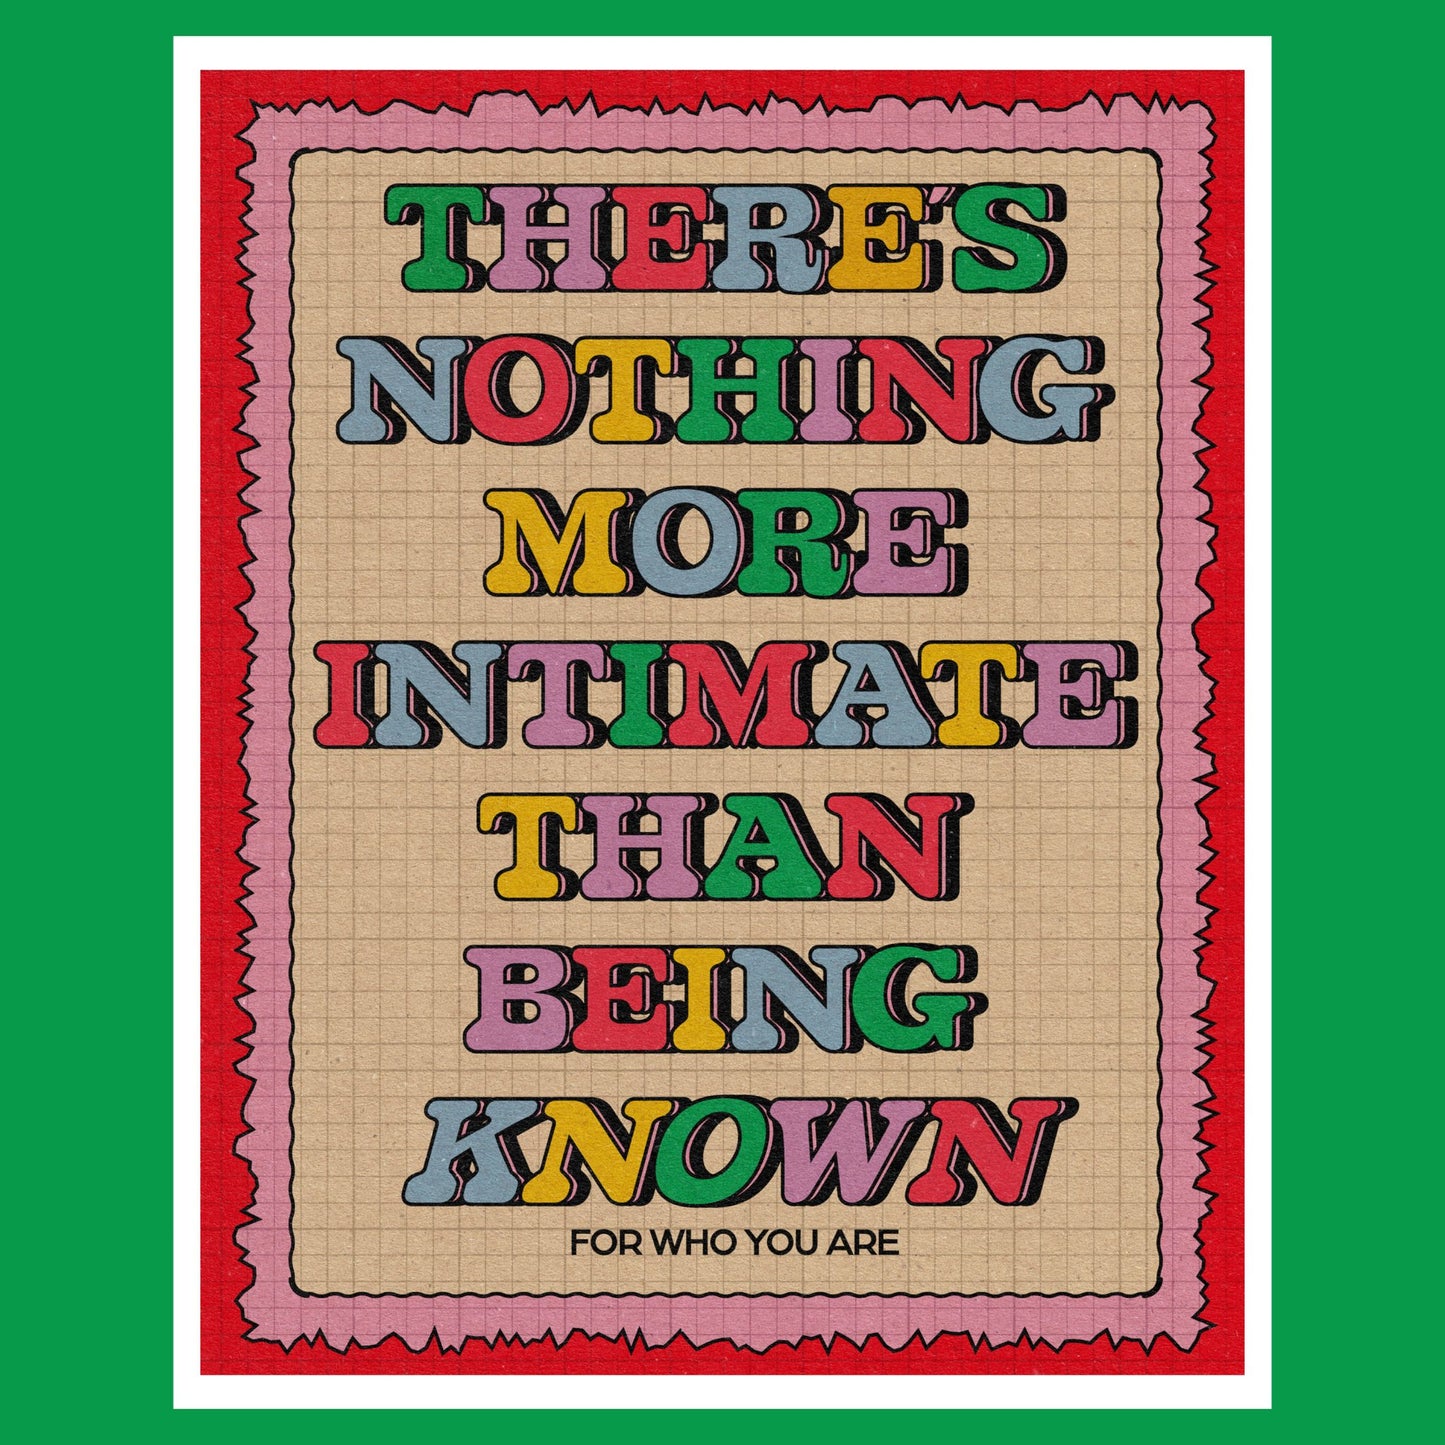 There's nothing more intimate than being known for who you are - art print by Posse Paper Goods